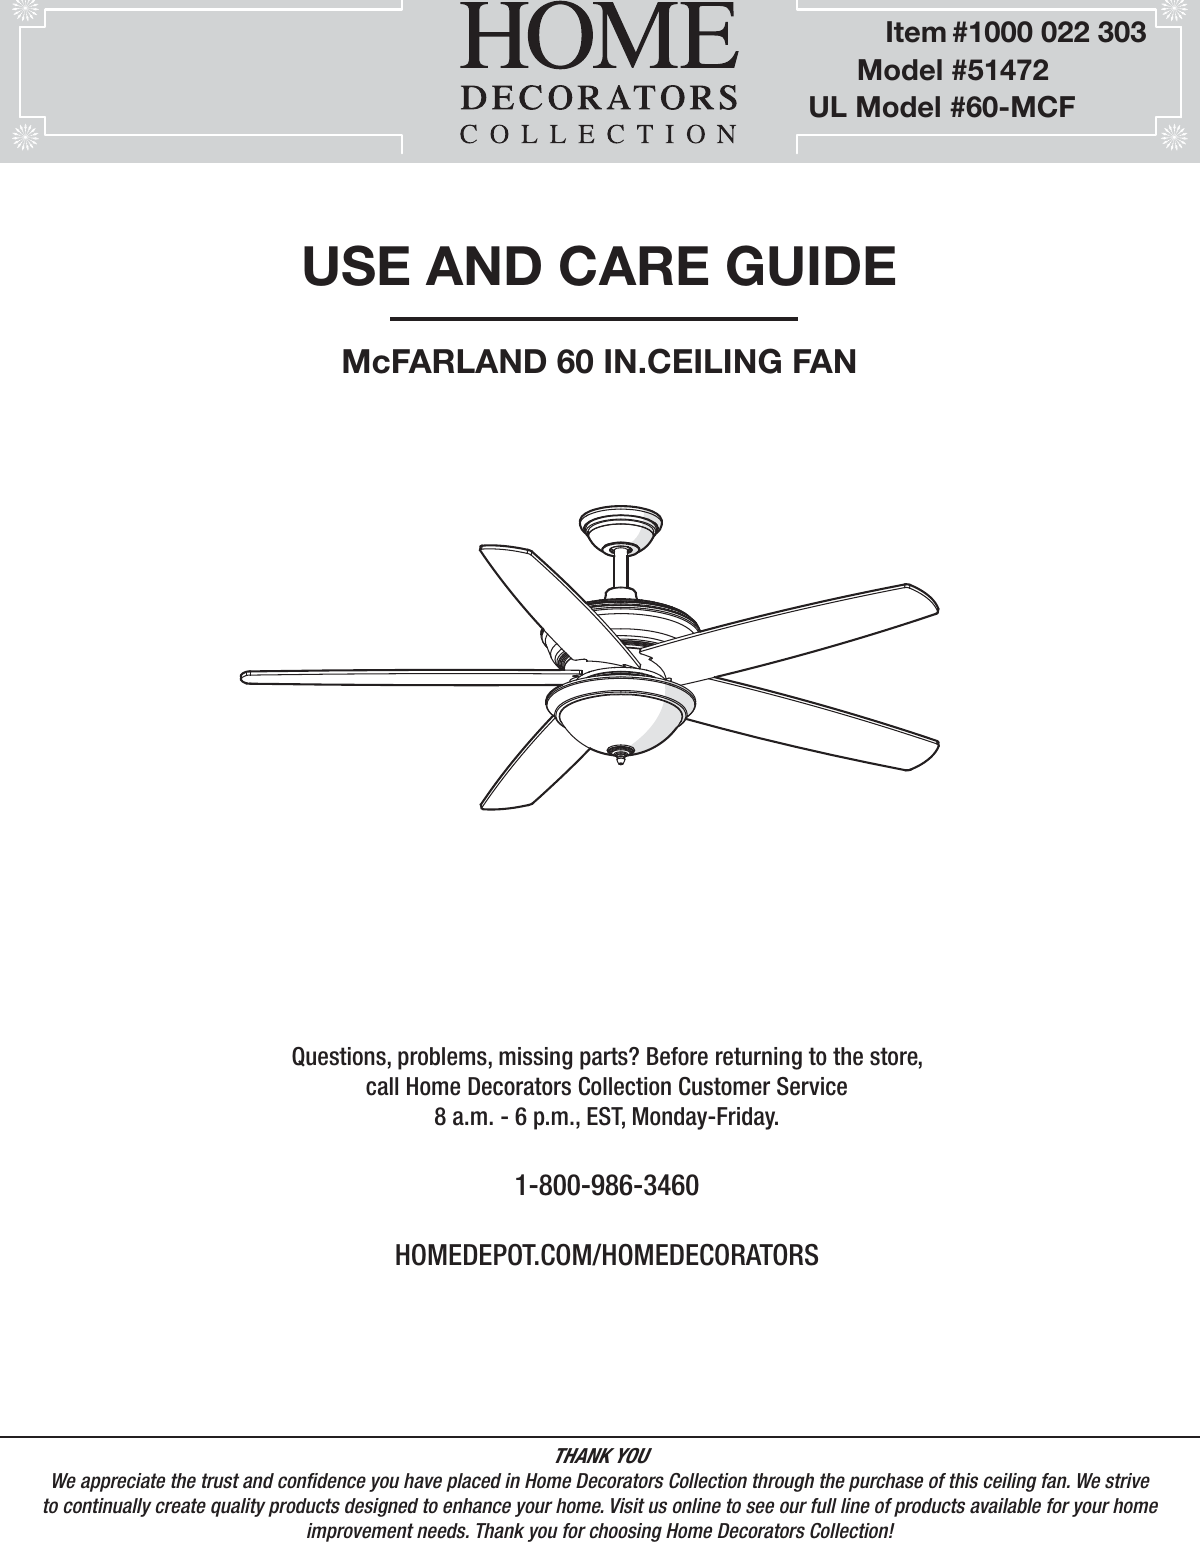 USE AND CARE GUIDEMcFARLAND 60 IN.CEILING FANQuestions, problems, missing parts? Before returning to the store,call Home Decorators Collection Customer Service8 a.m. - 6 p.m., EST, Monday-Friday.1-800-986-3460HOMEDEPOT.COM/HOMEDECORATORSTHANK YOUWe appreciate the trust and condence you have placed in Home Decorators Collection through the purchase of this ceiling fan. We strive to continually create quality products designed to enhance your home. Visit us online to see our full line of products available for your home improvement needs. Thank you for choosing Home Decorators Collection!             Item #1000 022 303         Model #51472   UL Model #60-MCF